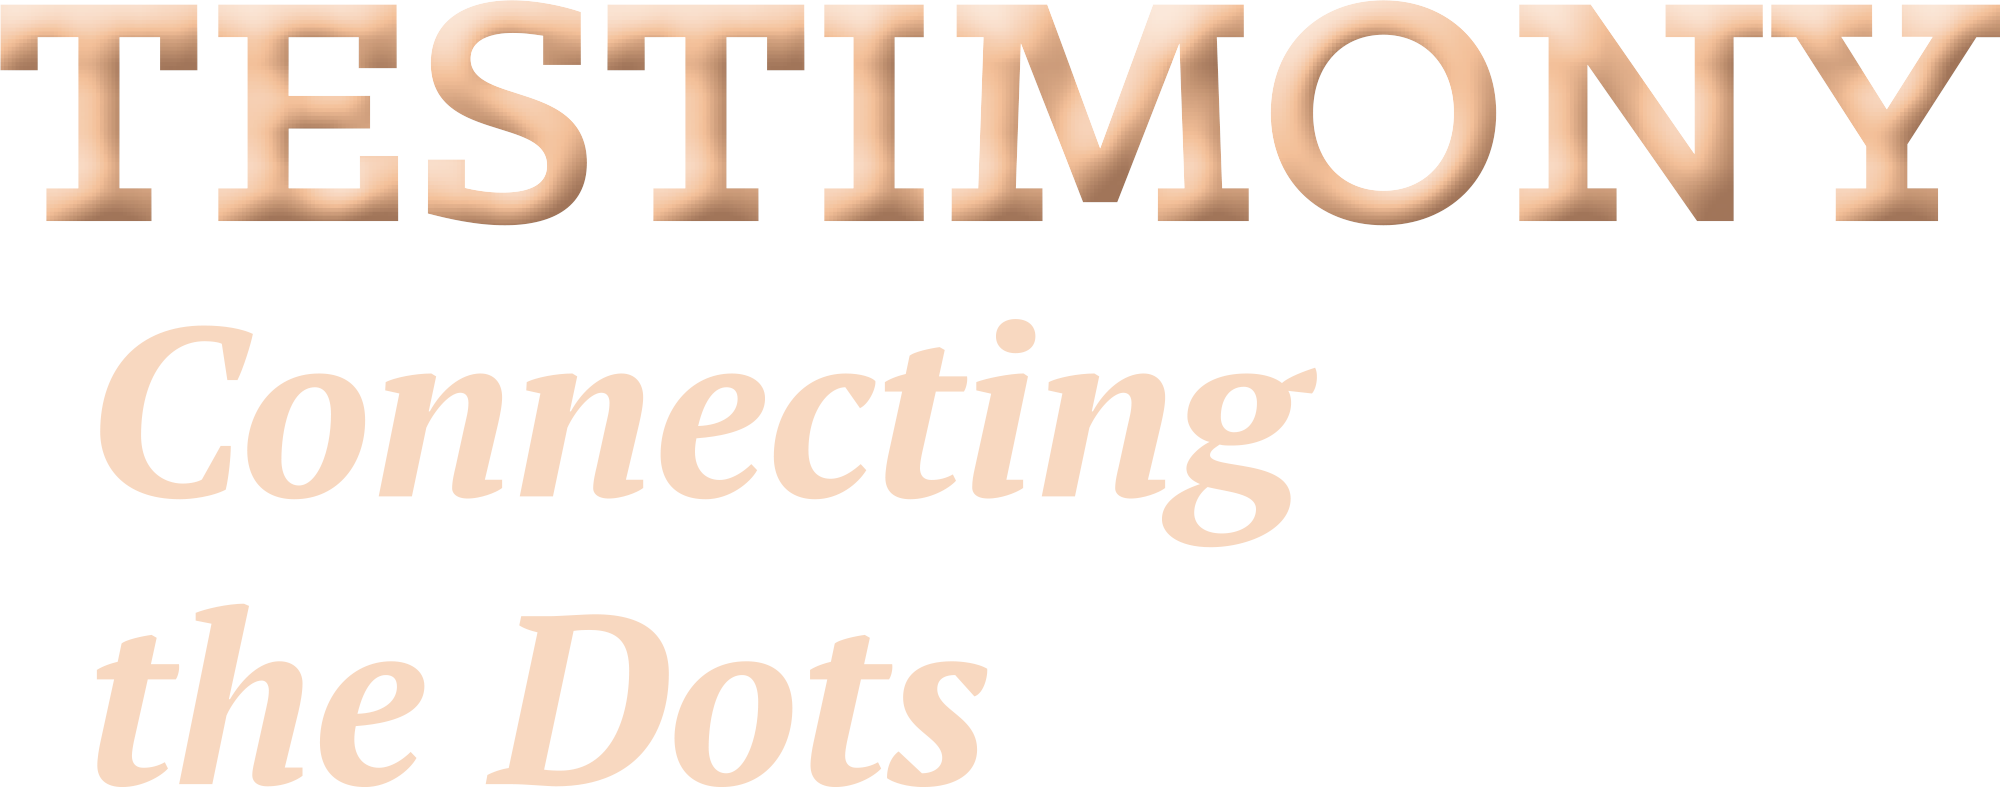 Testimony: Connecting the Dots